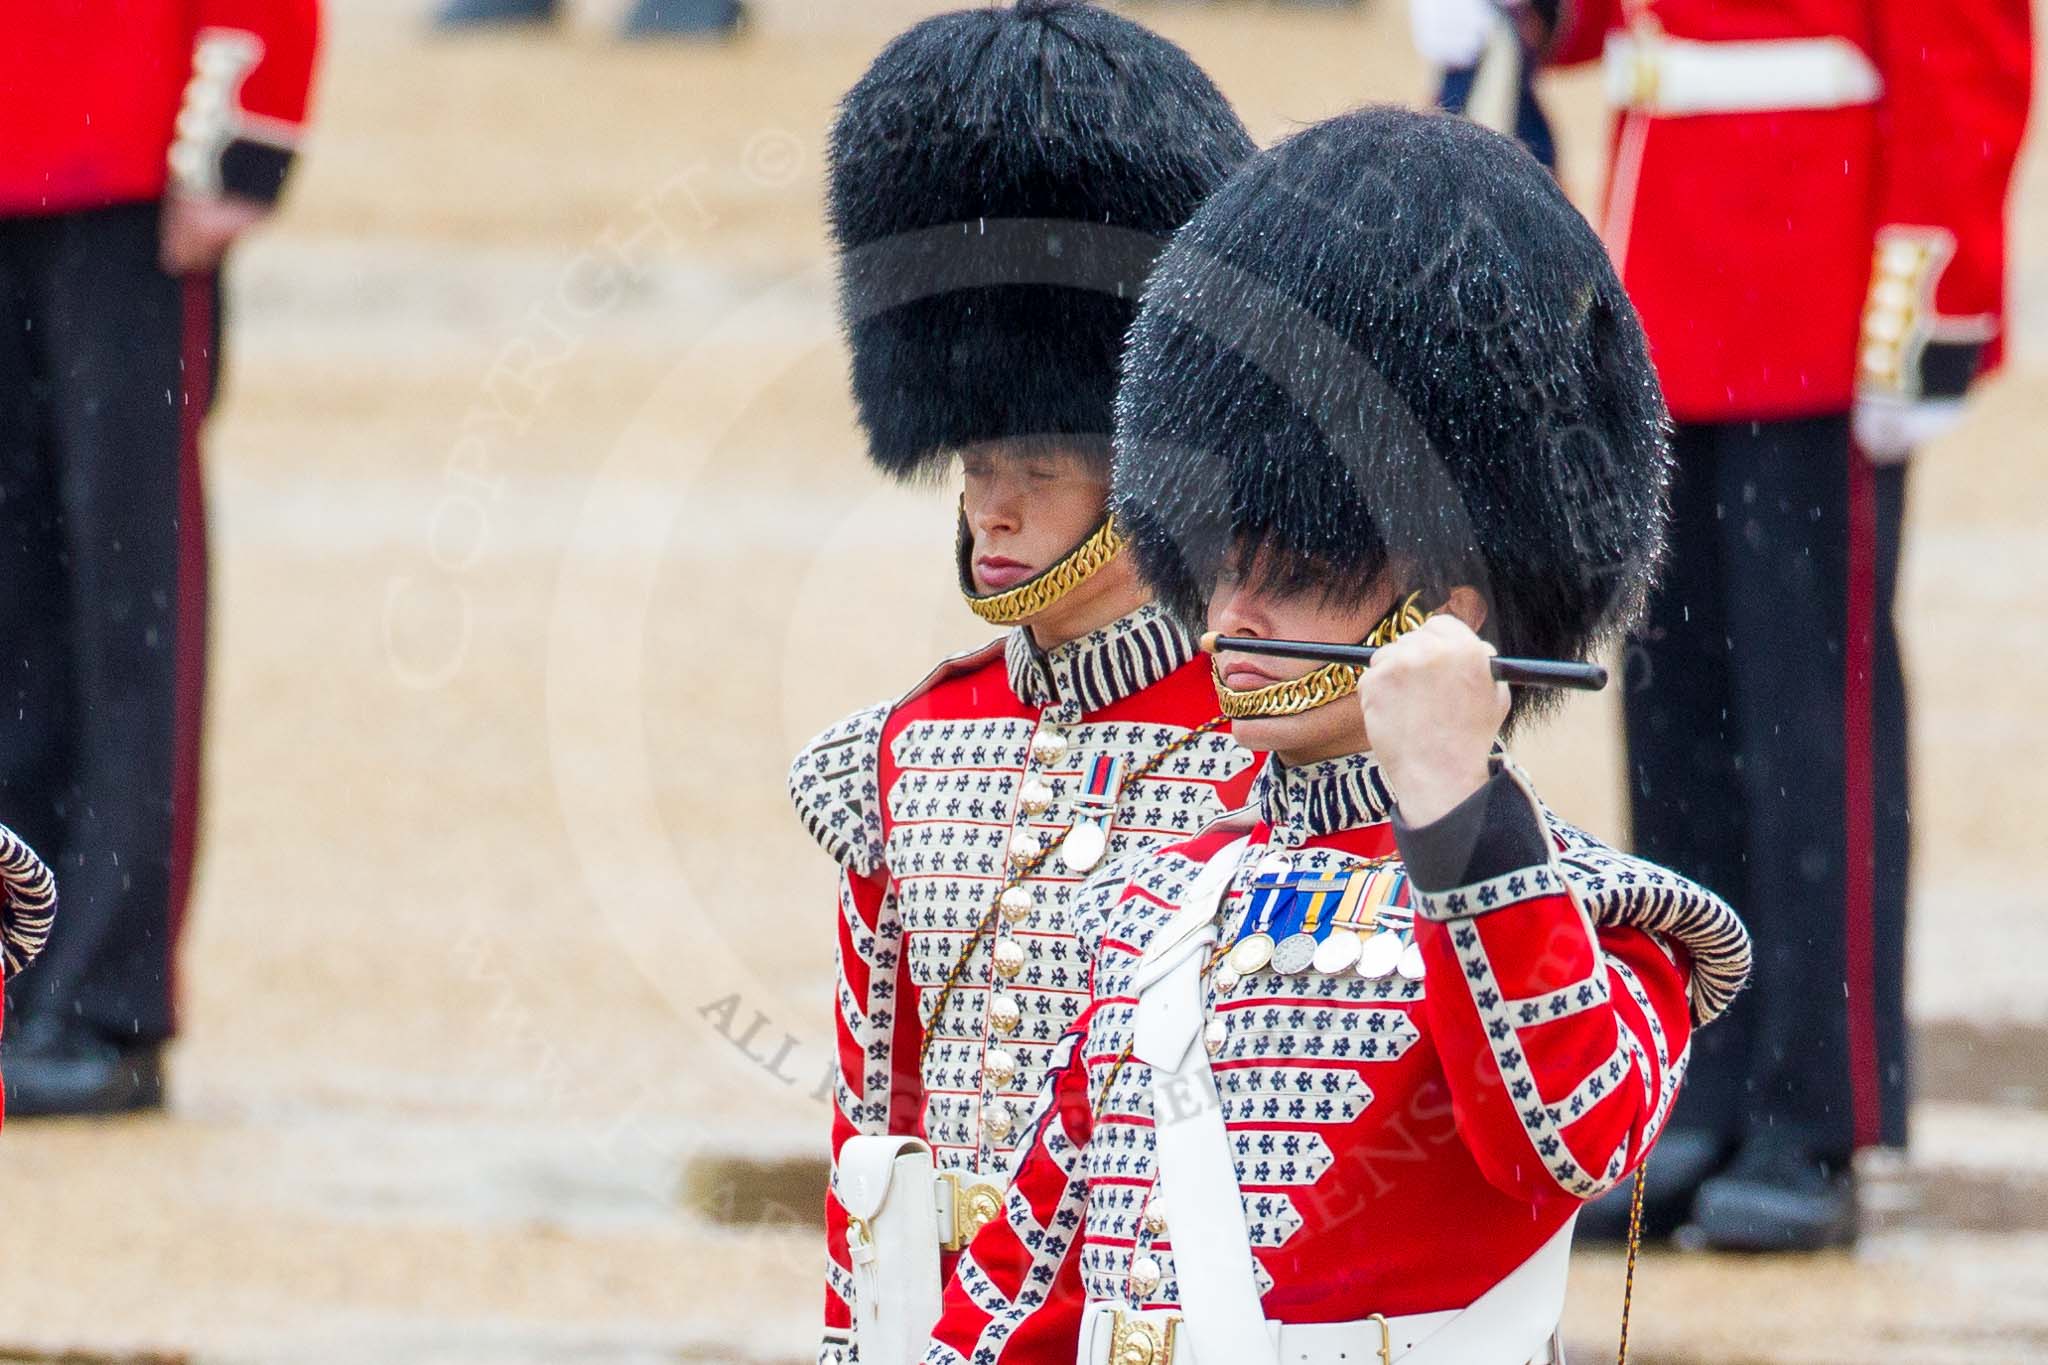 The Colonel's Review 2014.
Horse Guards Parade, Westminster,
London,

United Kingdom,
on 07 June 2014 at 11:10, image #332